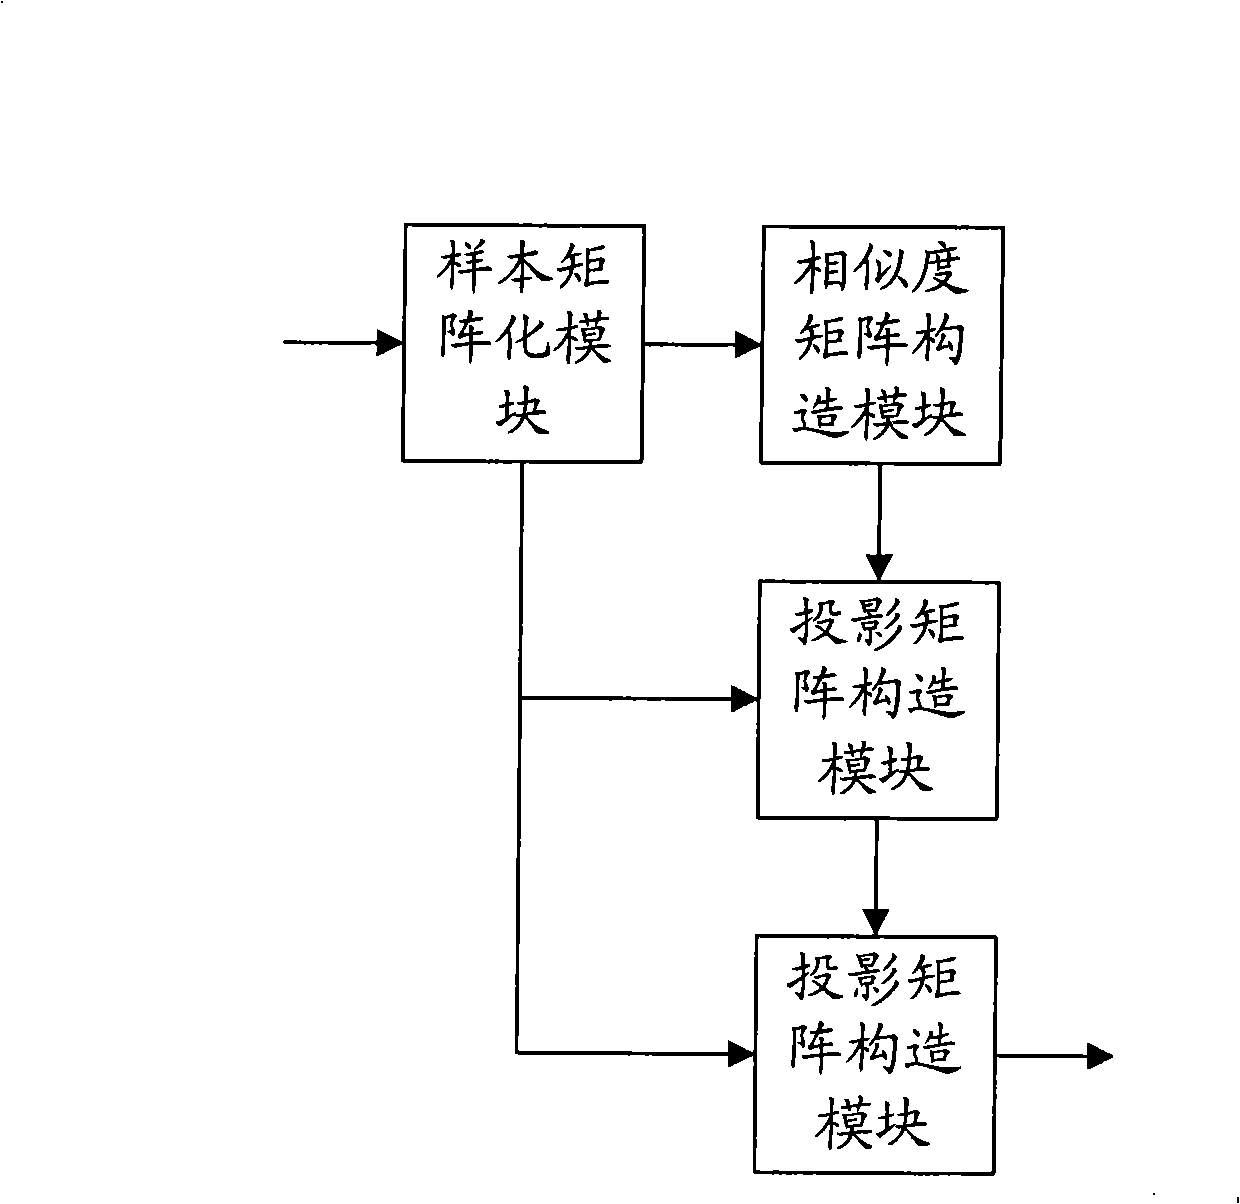 Method and apparatus for extracting human face recognition characteristic